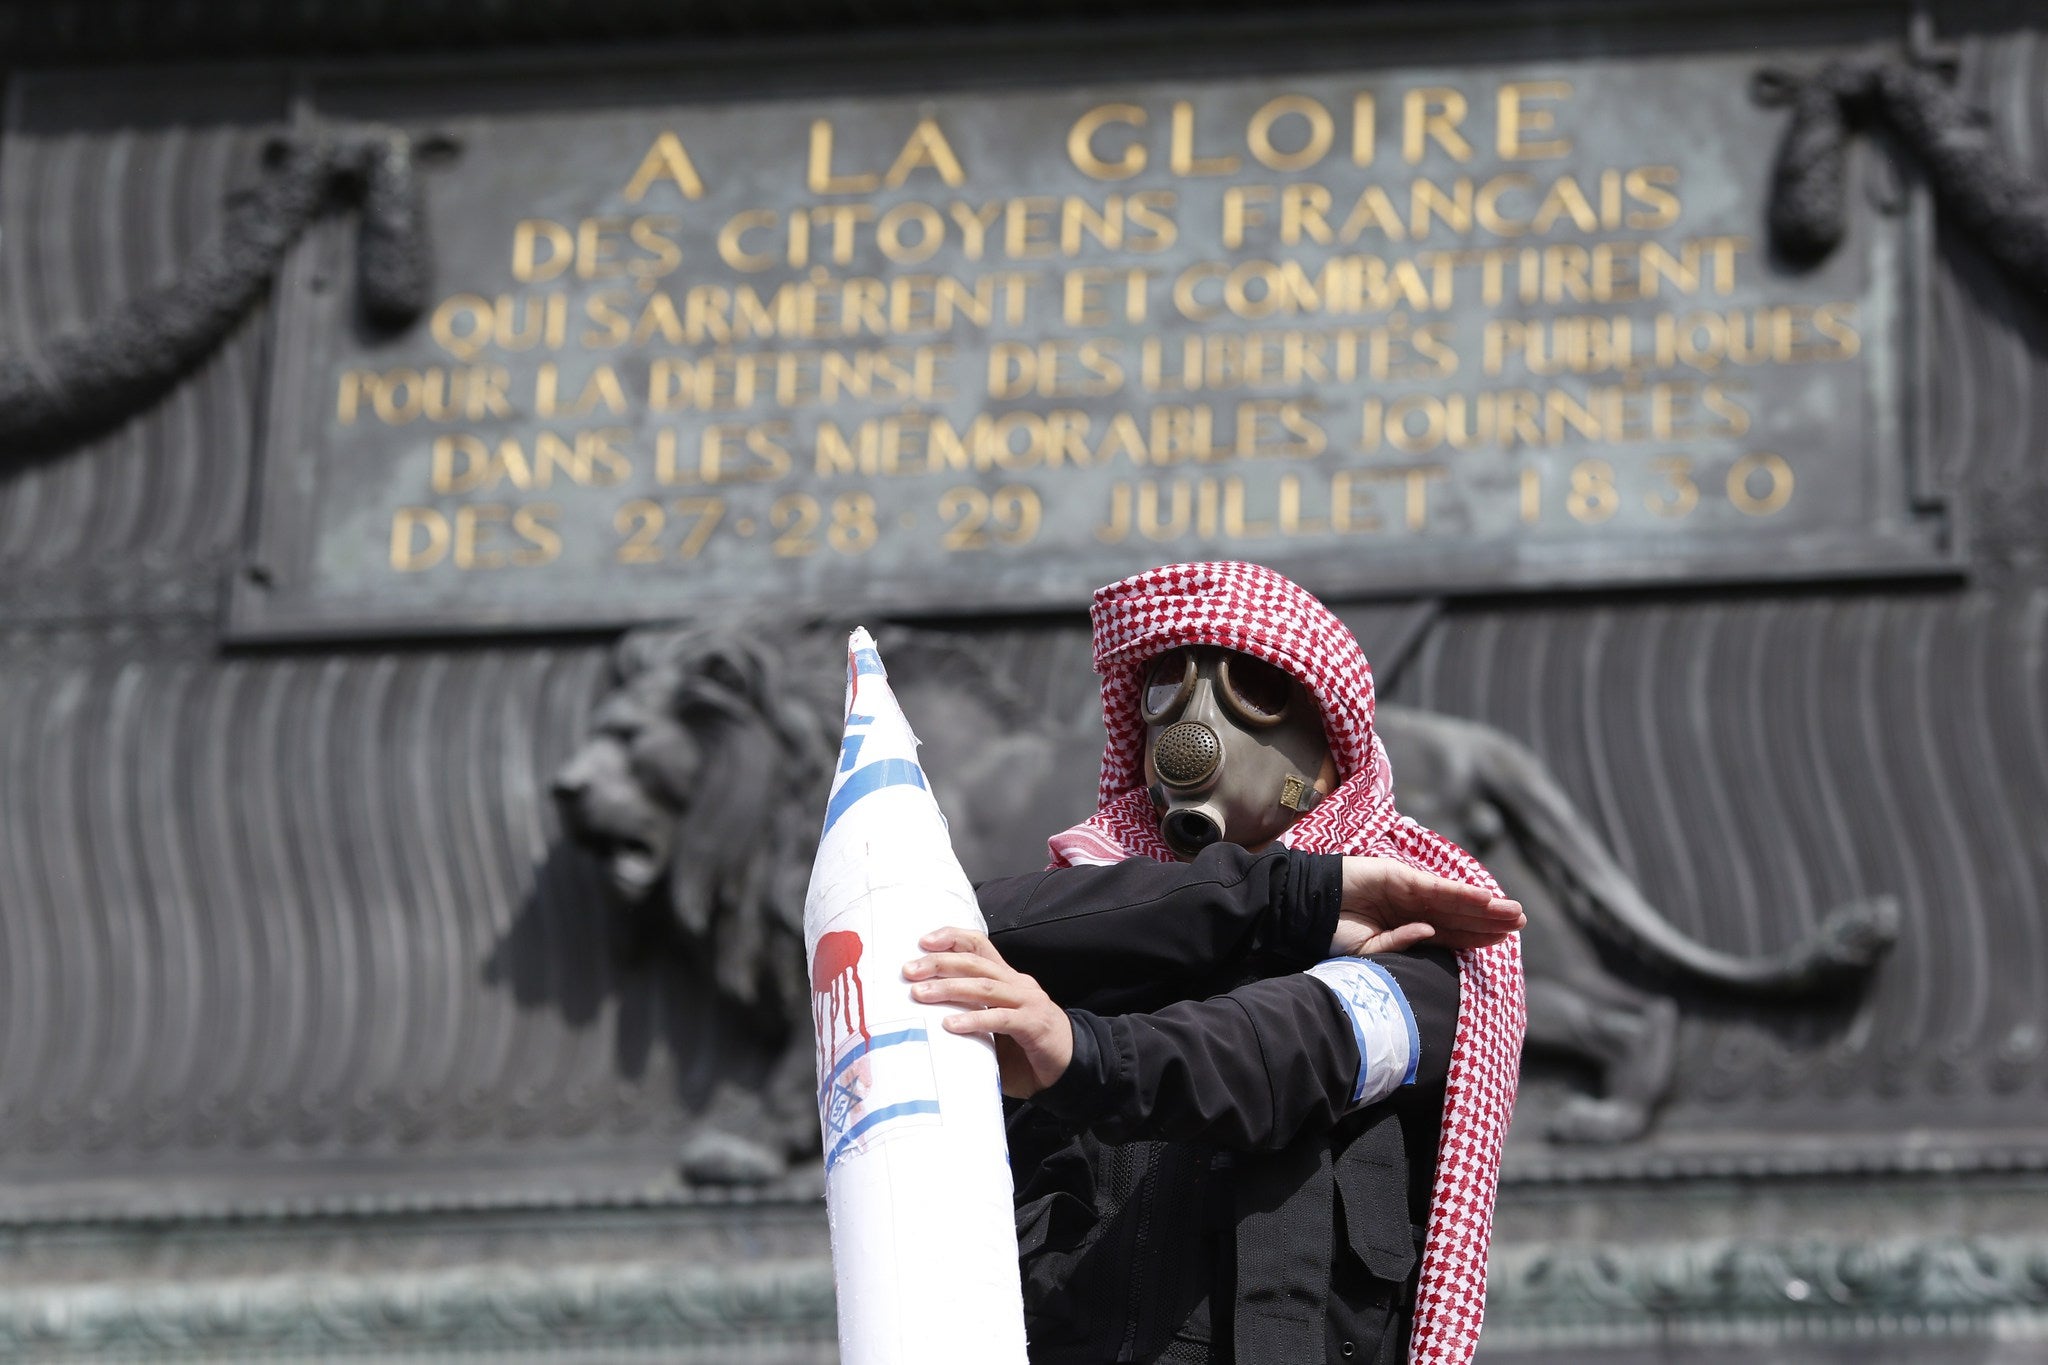 The quenelle gesture, widely seen as anti-Semitic, given in France